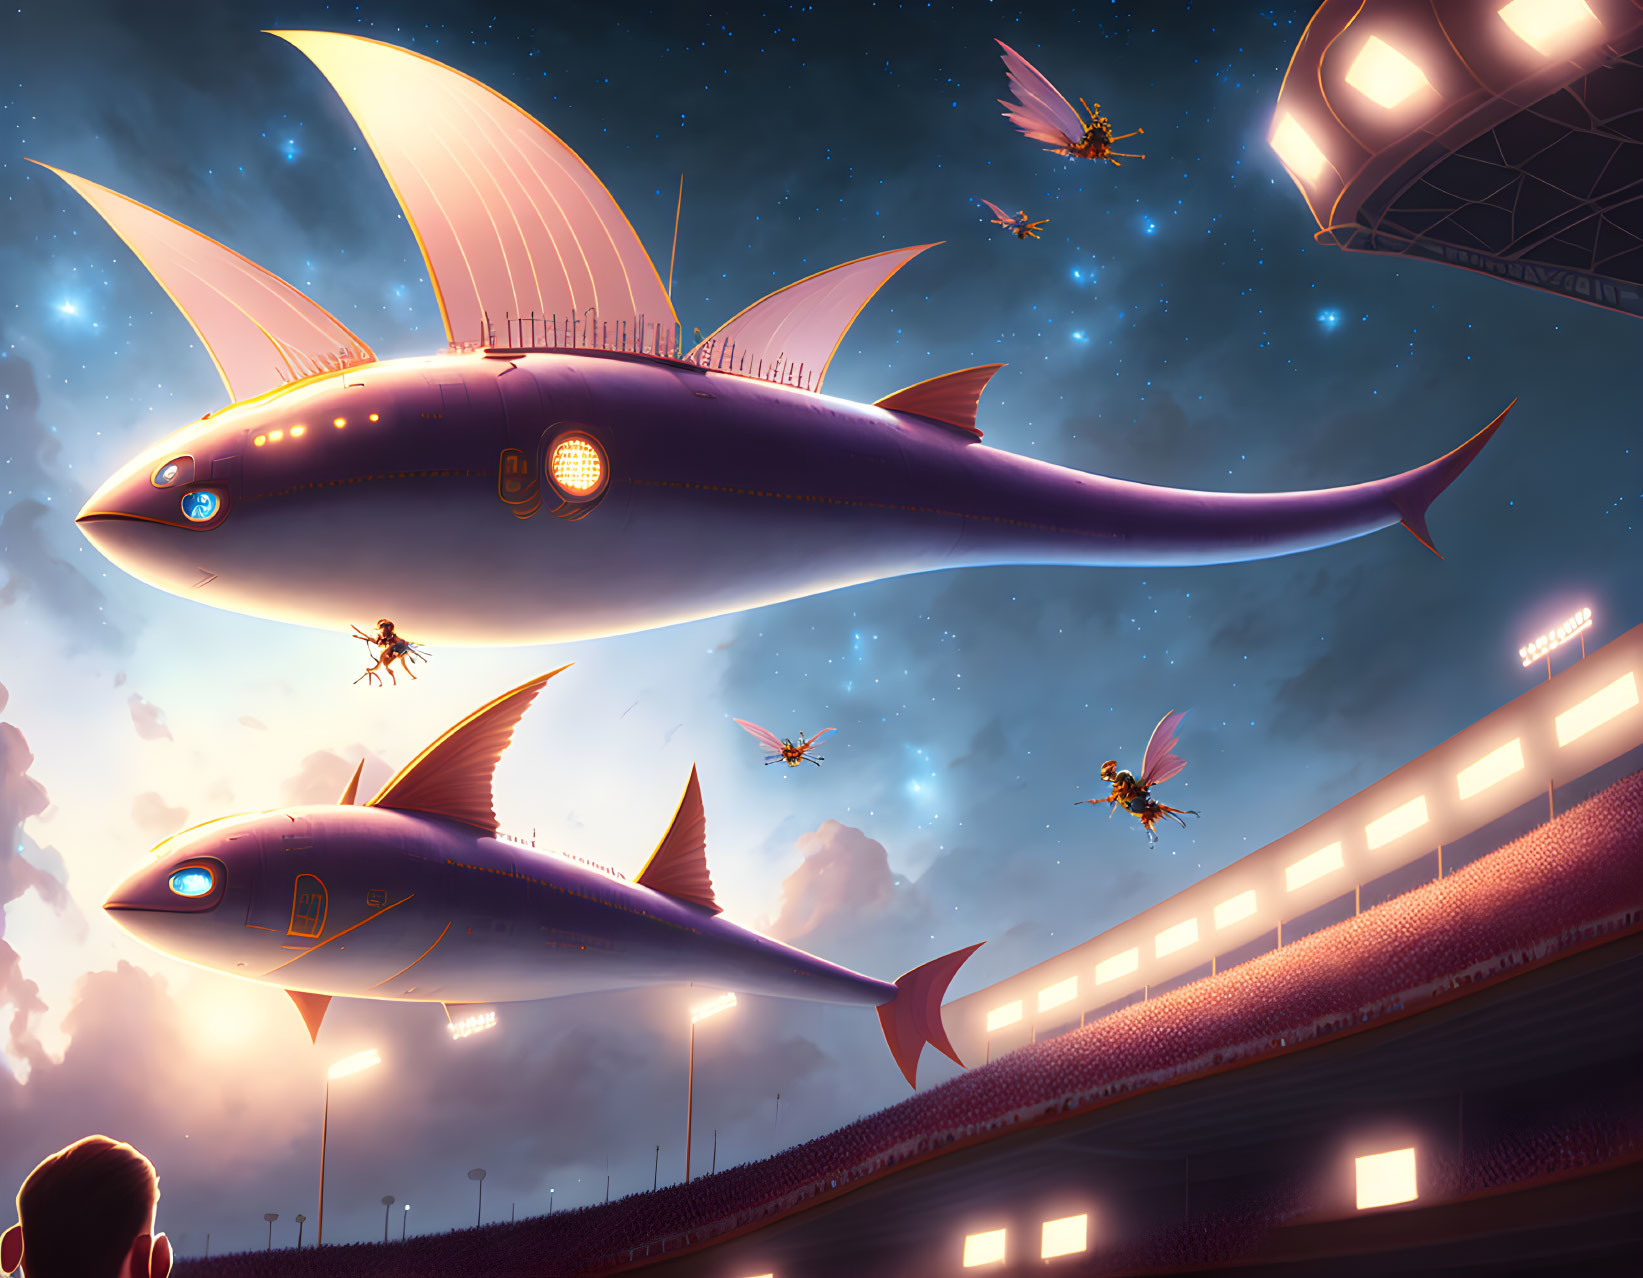 Child observing glowing fish-like airships in the sky at dusk